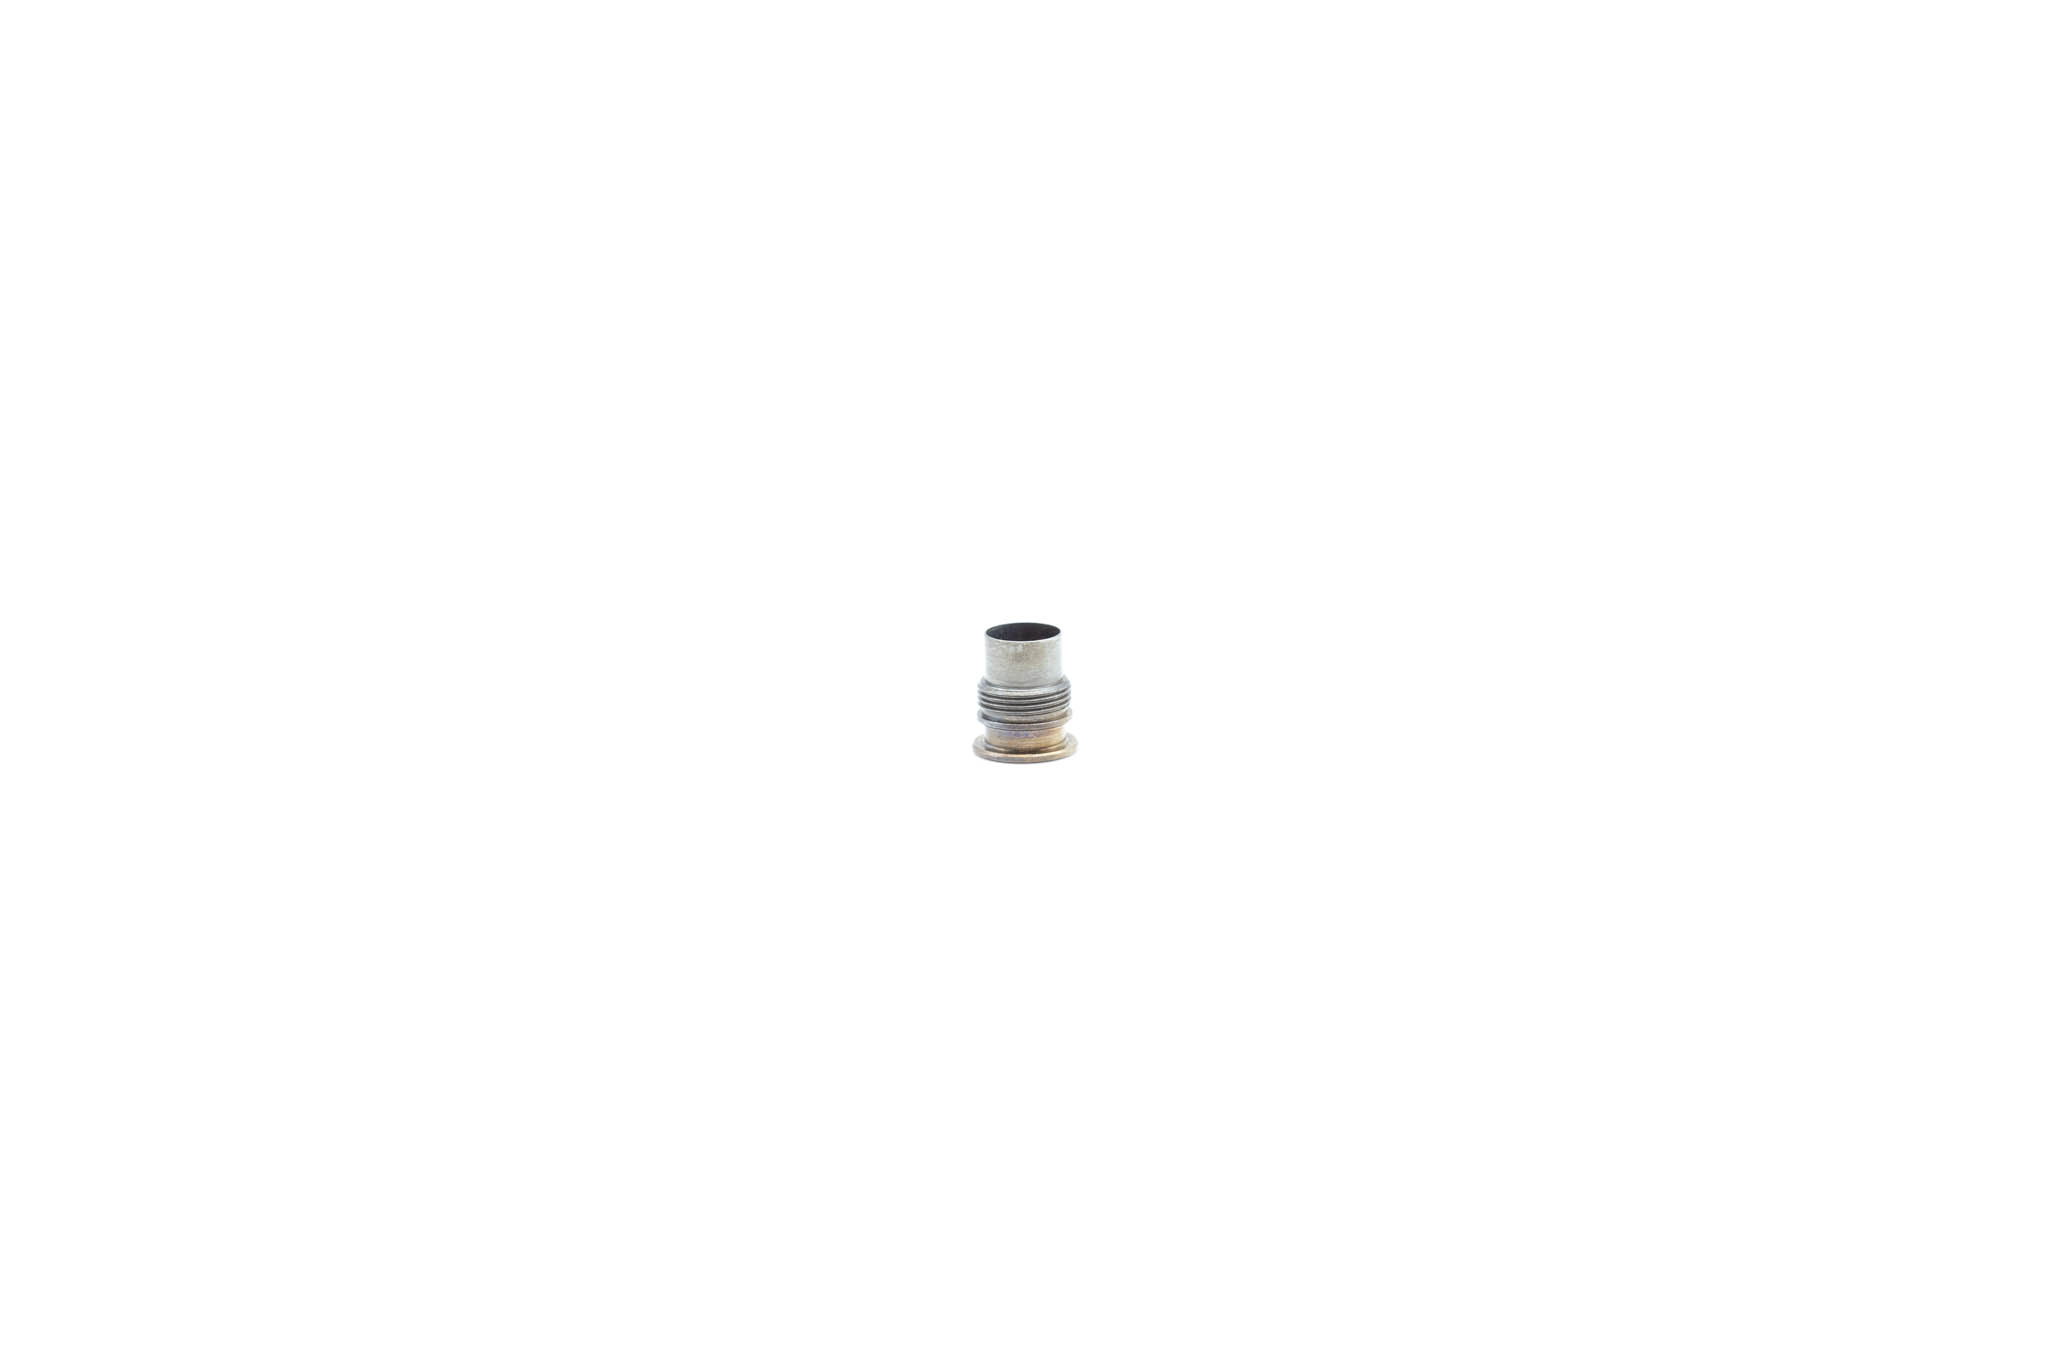 OEM Insertion Tube Proximal End Fitting - BF-40